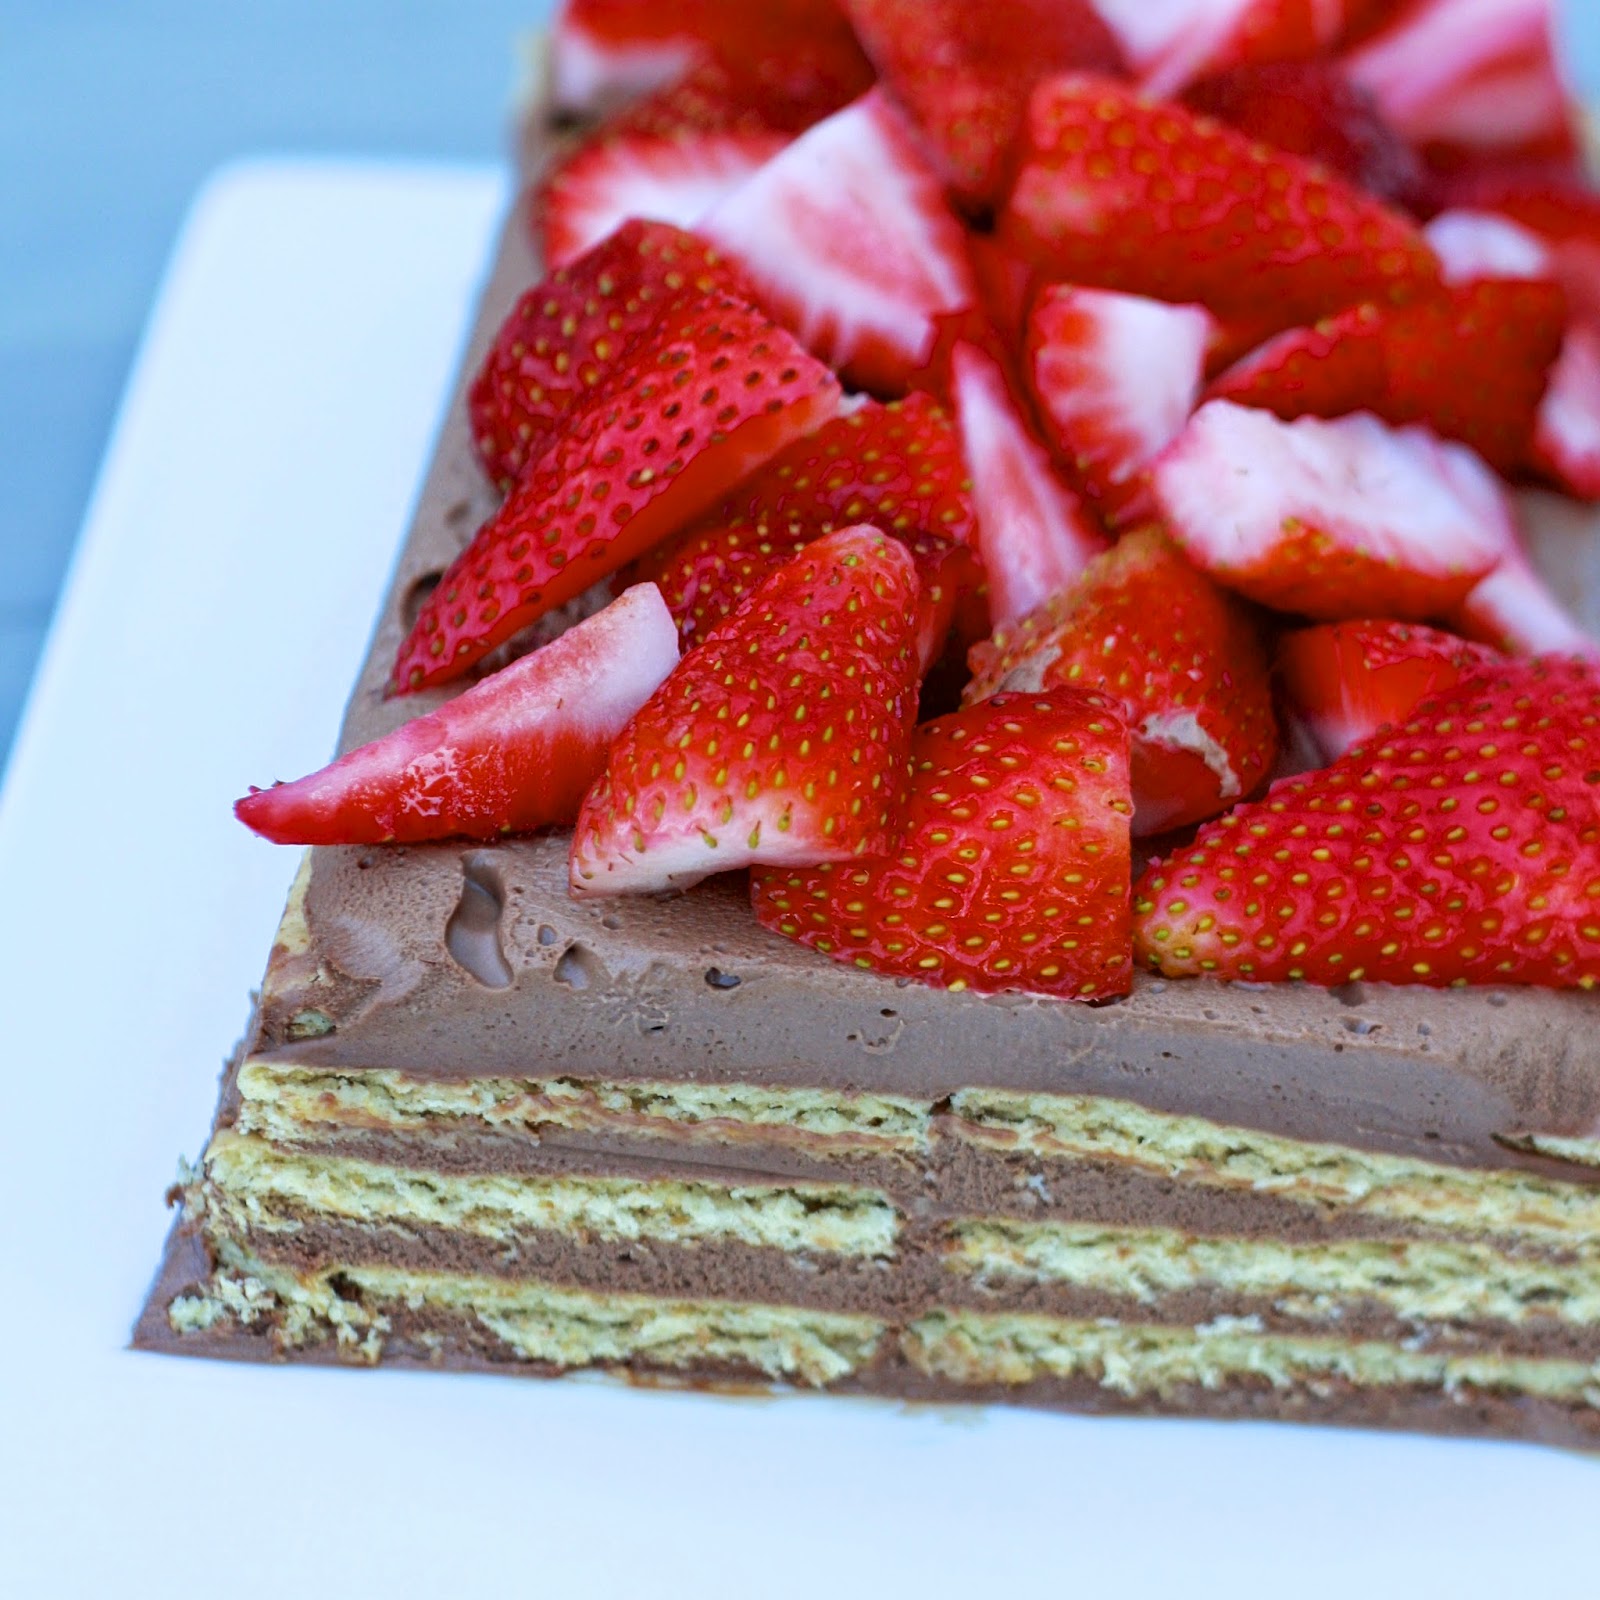 No Bake Chocolate Layered Cheesecake with Strawberries | The Sweets Life